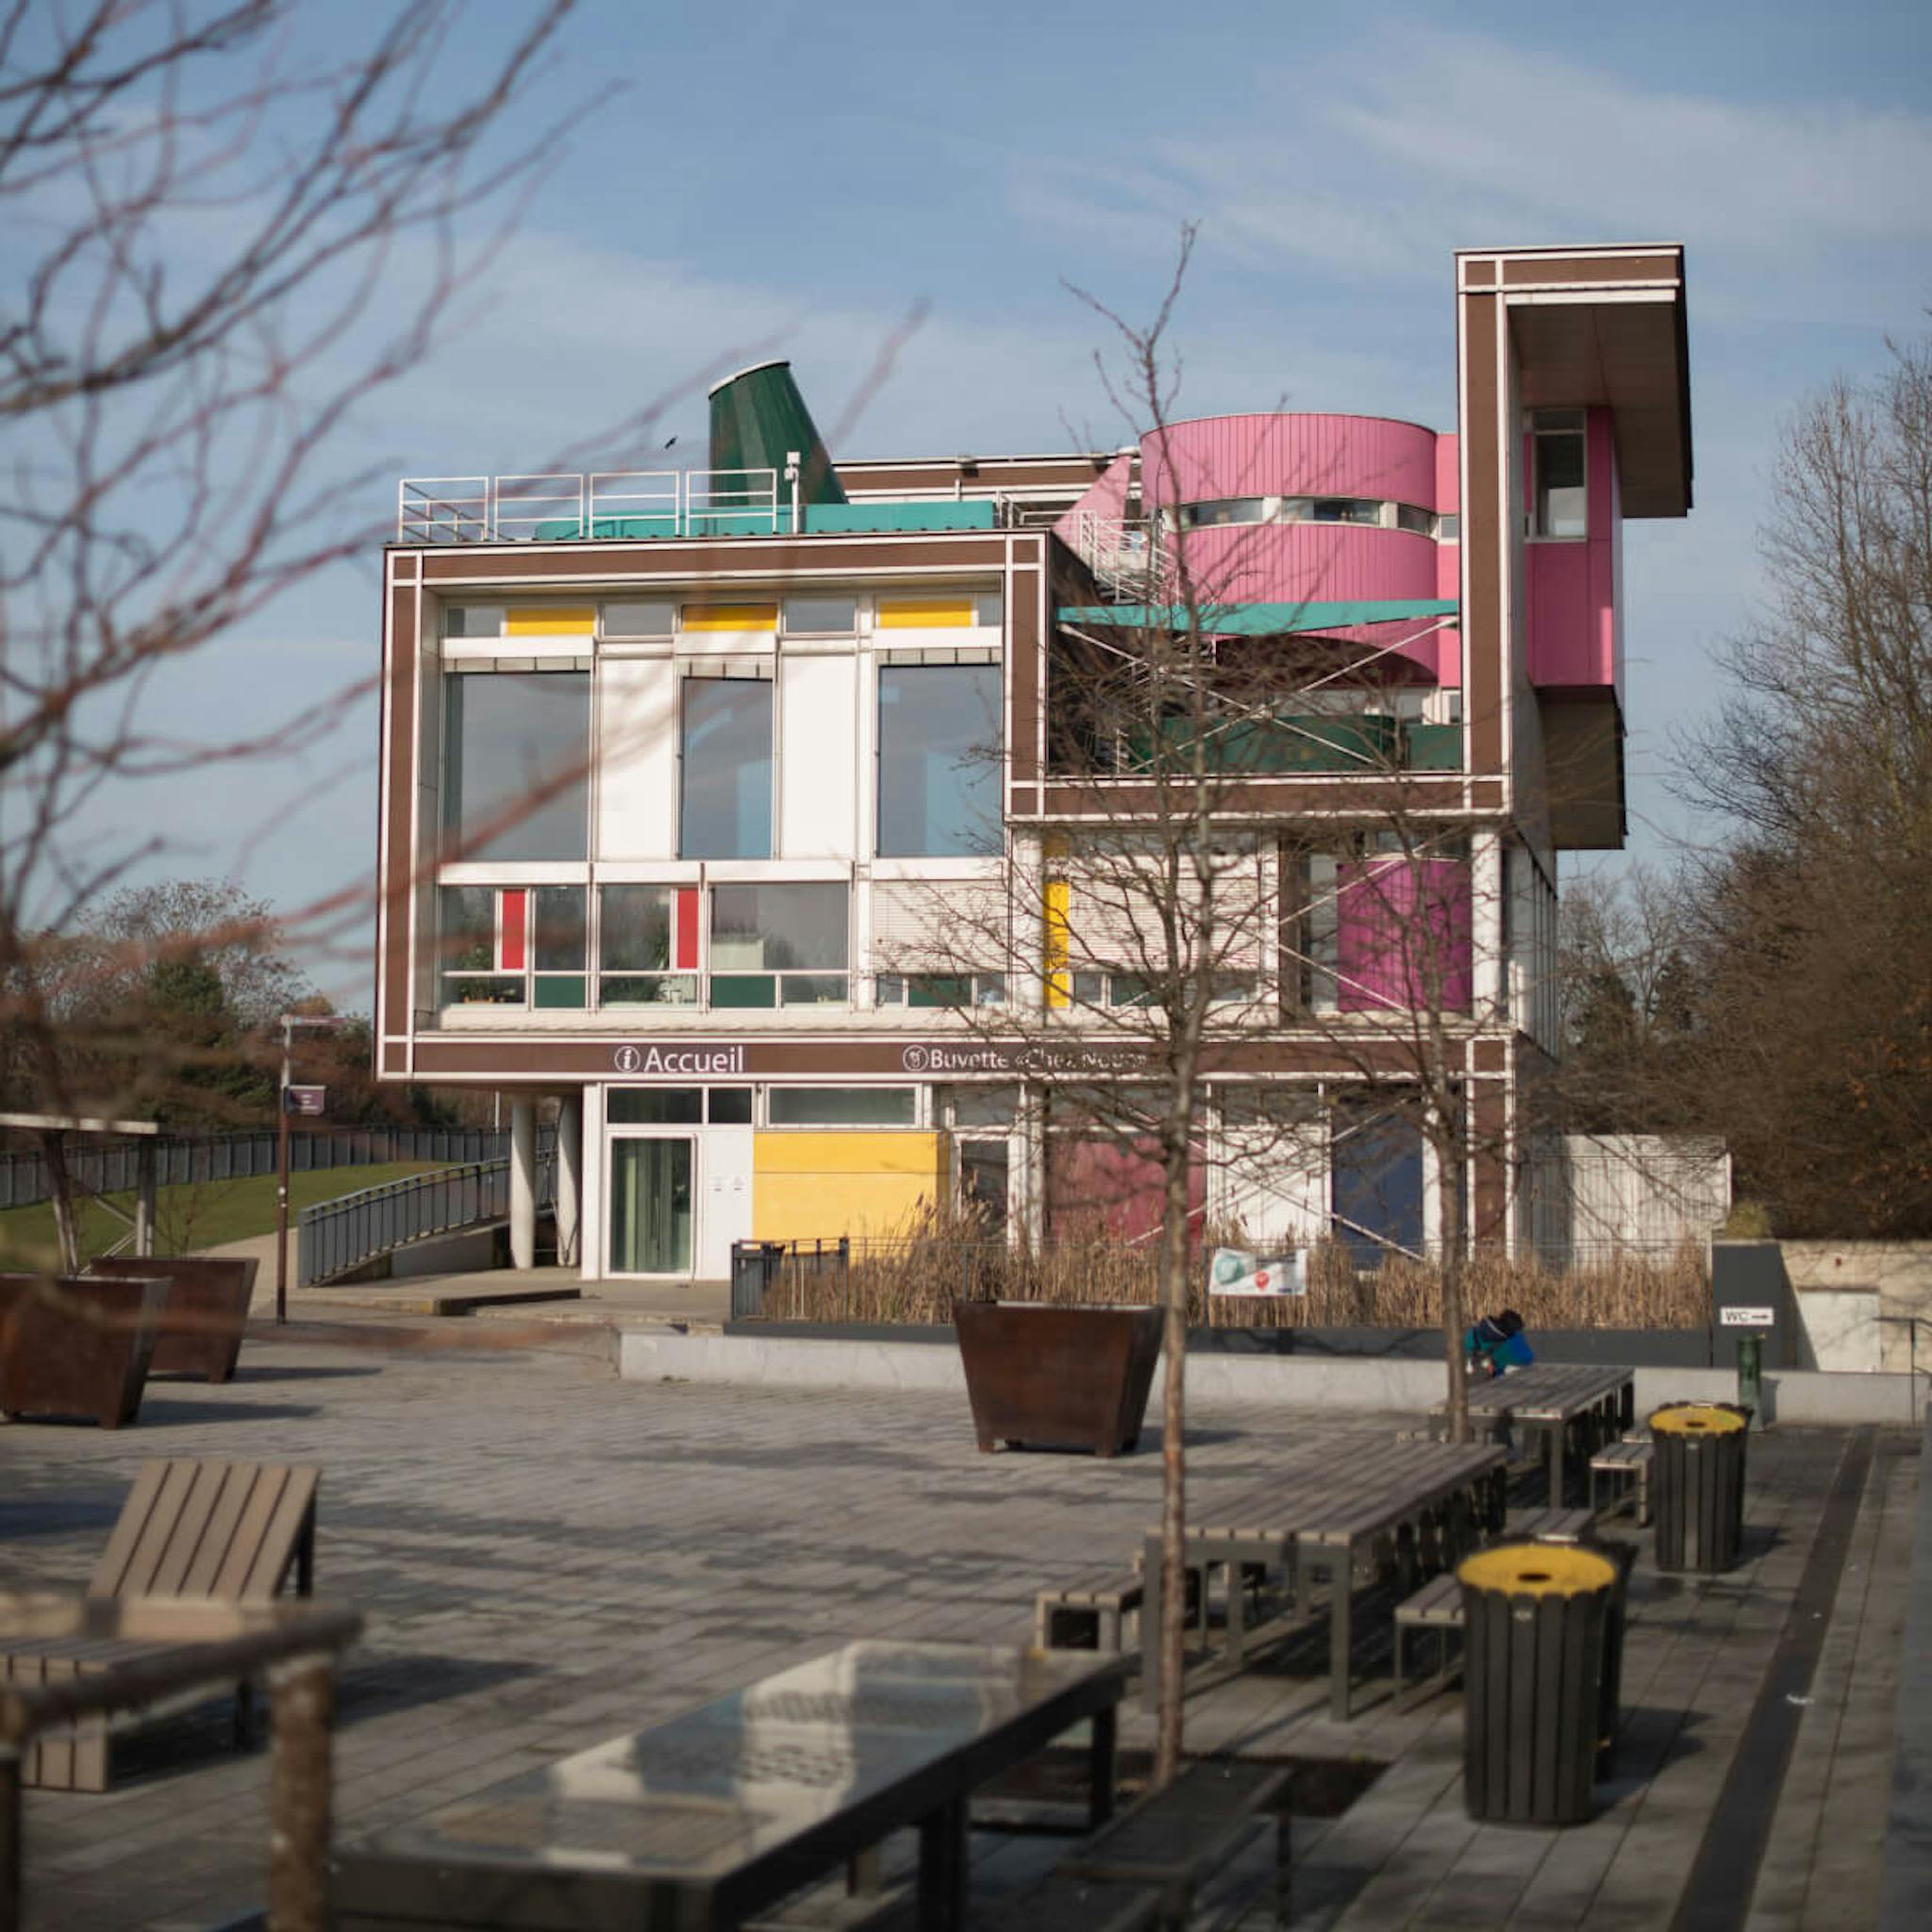 A contemporary building with pink and yellow panels, surrounded by bare trees and outdoor benches.